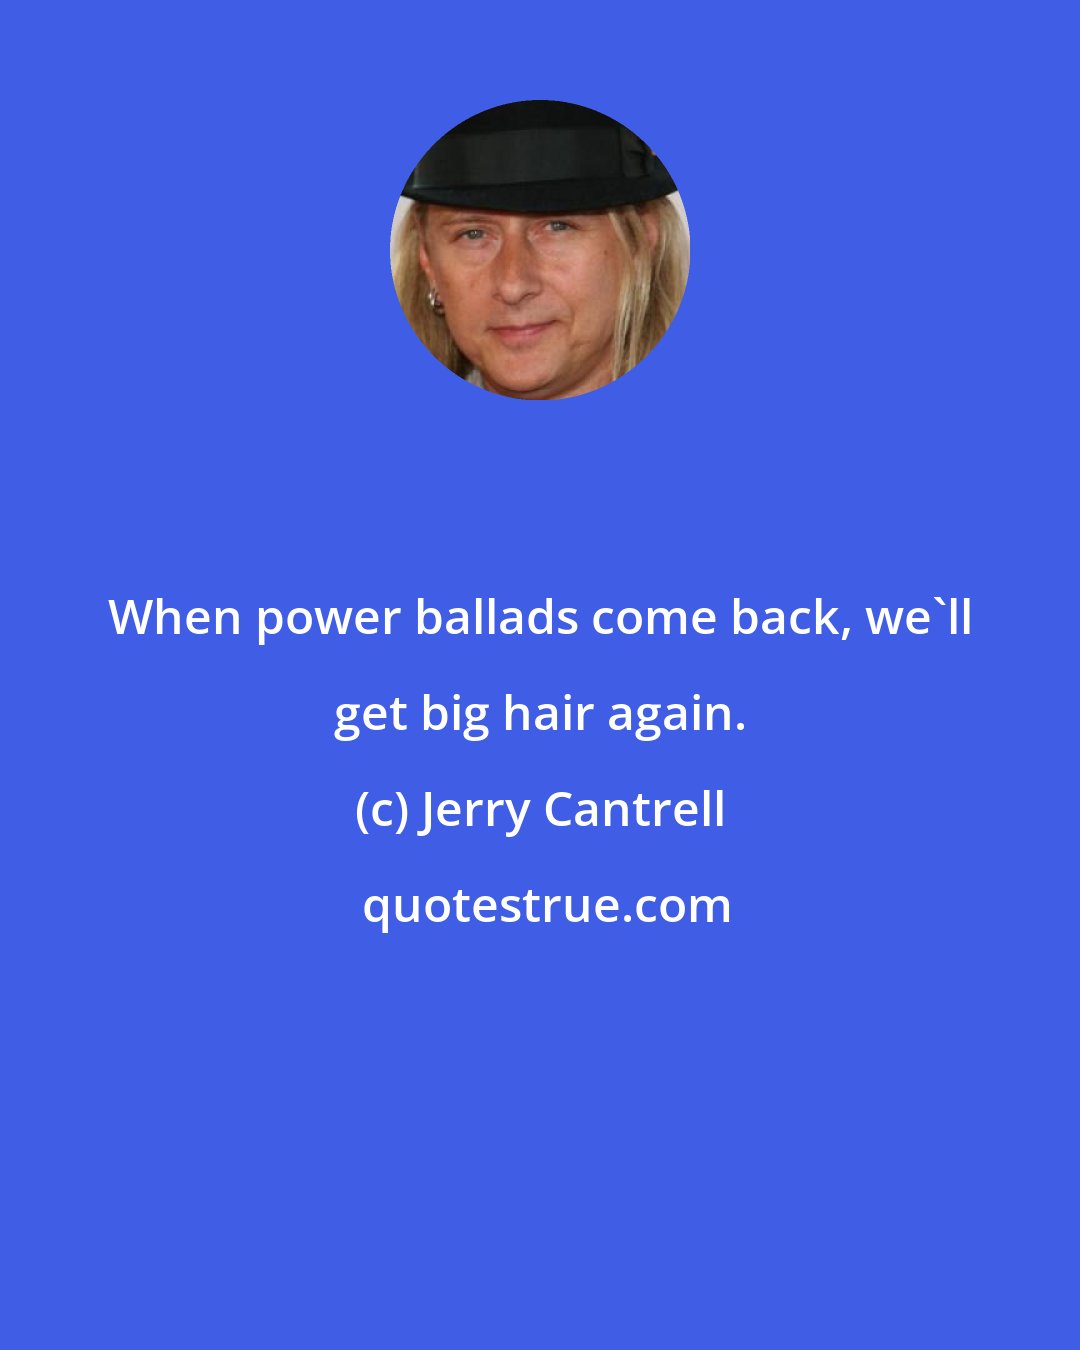 Jerry Cantrell: When power ballads come back, we'll get big hair again.